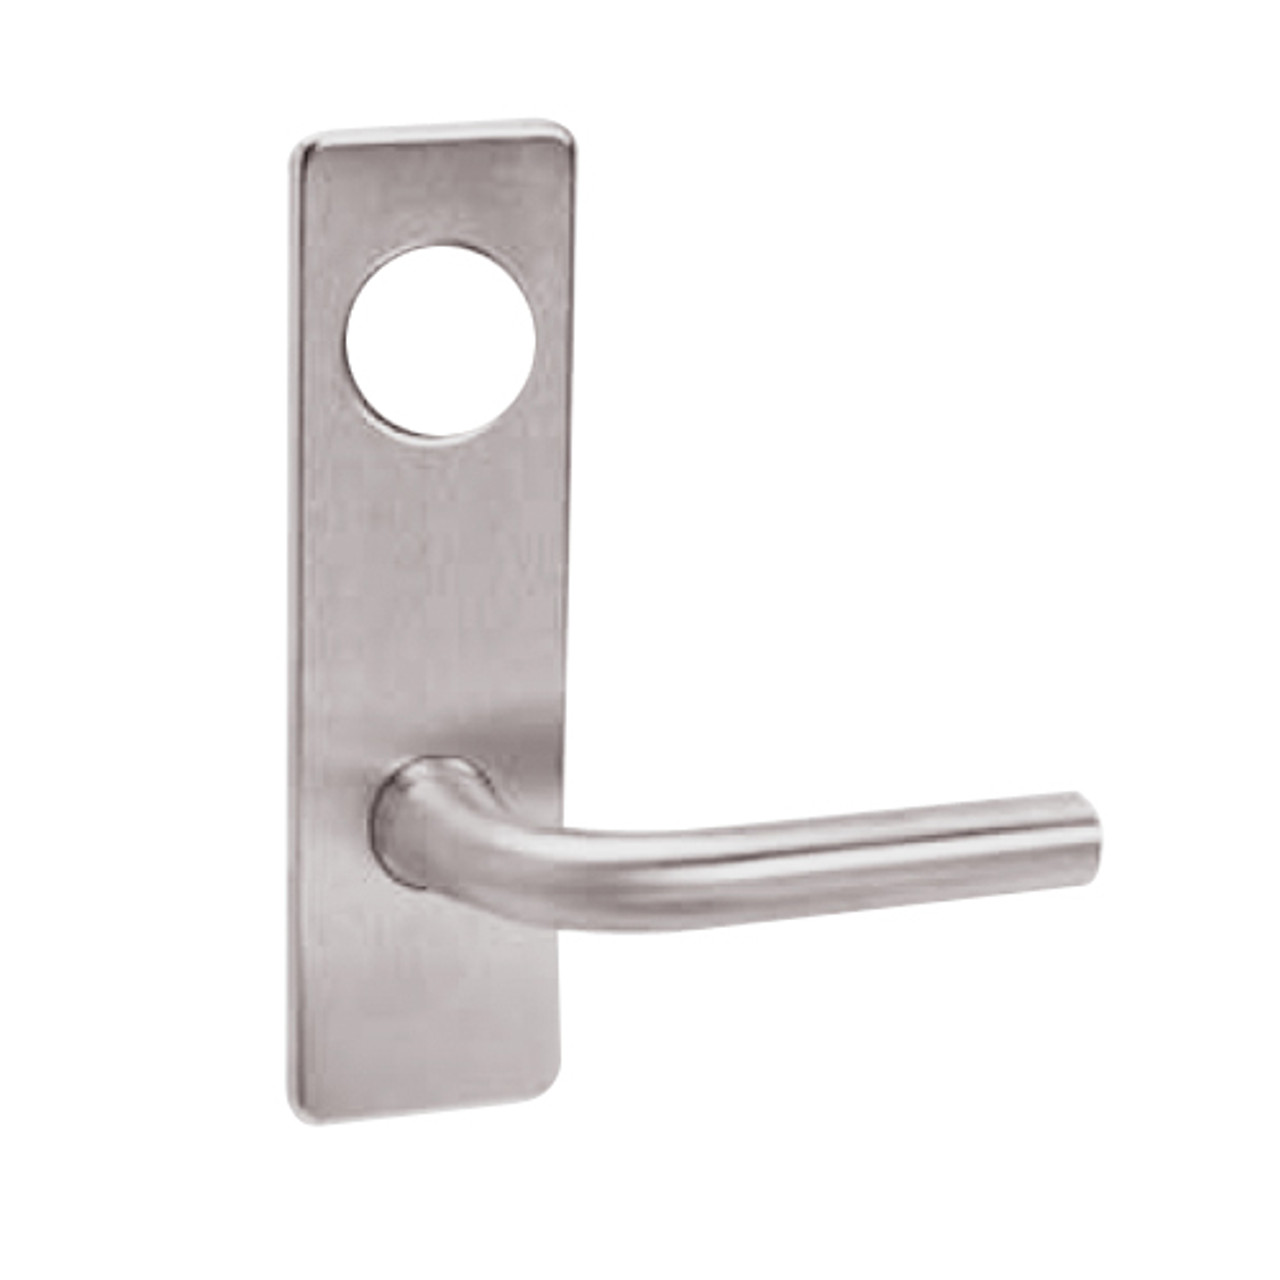 ML2054-RSN-630-CL7 Corbin Russwin ML2000 Series IC 7-Pin Less Core Mortise Entrance Locksets with Regis Lever in Satin Stainless